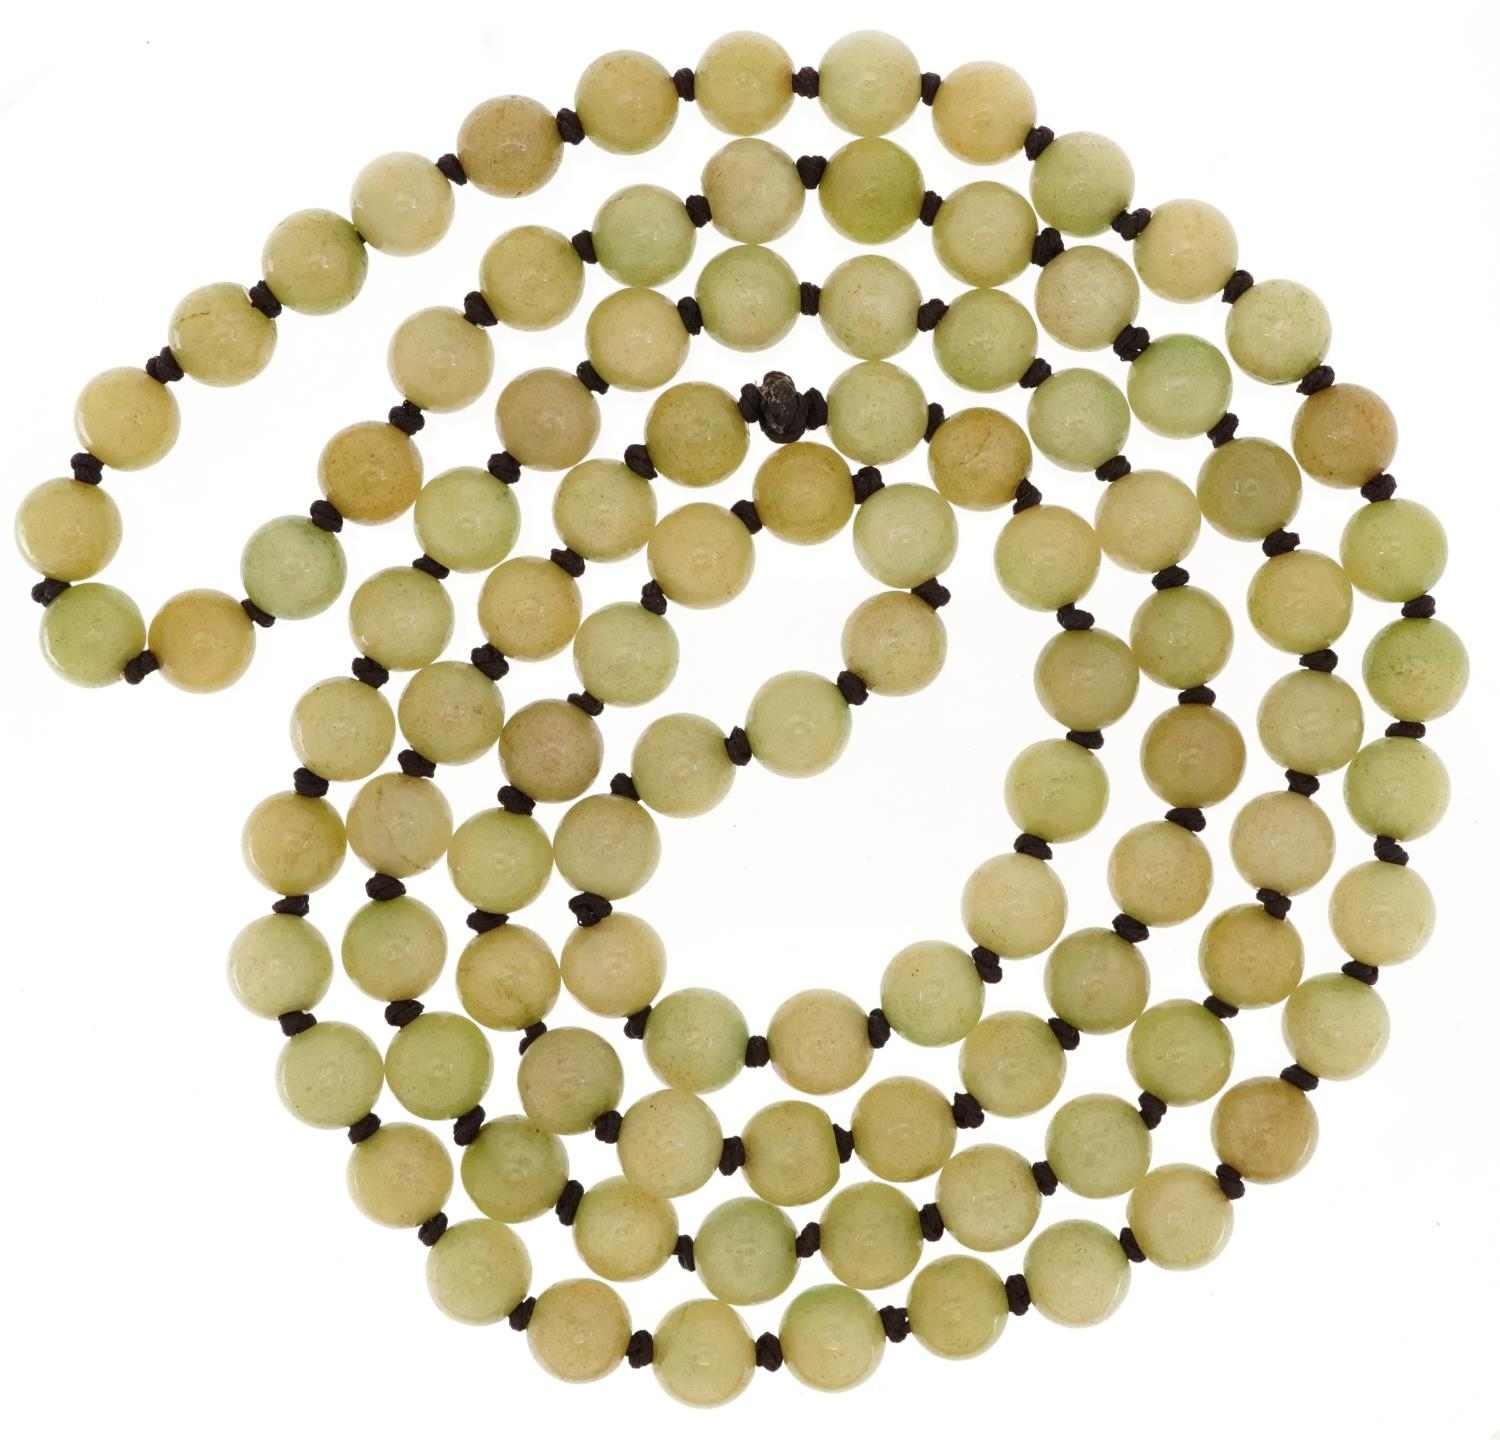 Chinese green jade bead necklace, 124cm in length, 150.7g - Image 2 of 2